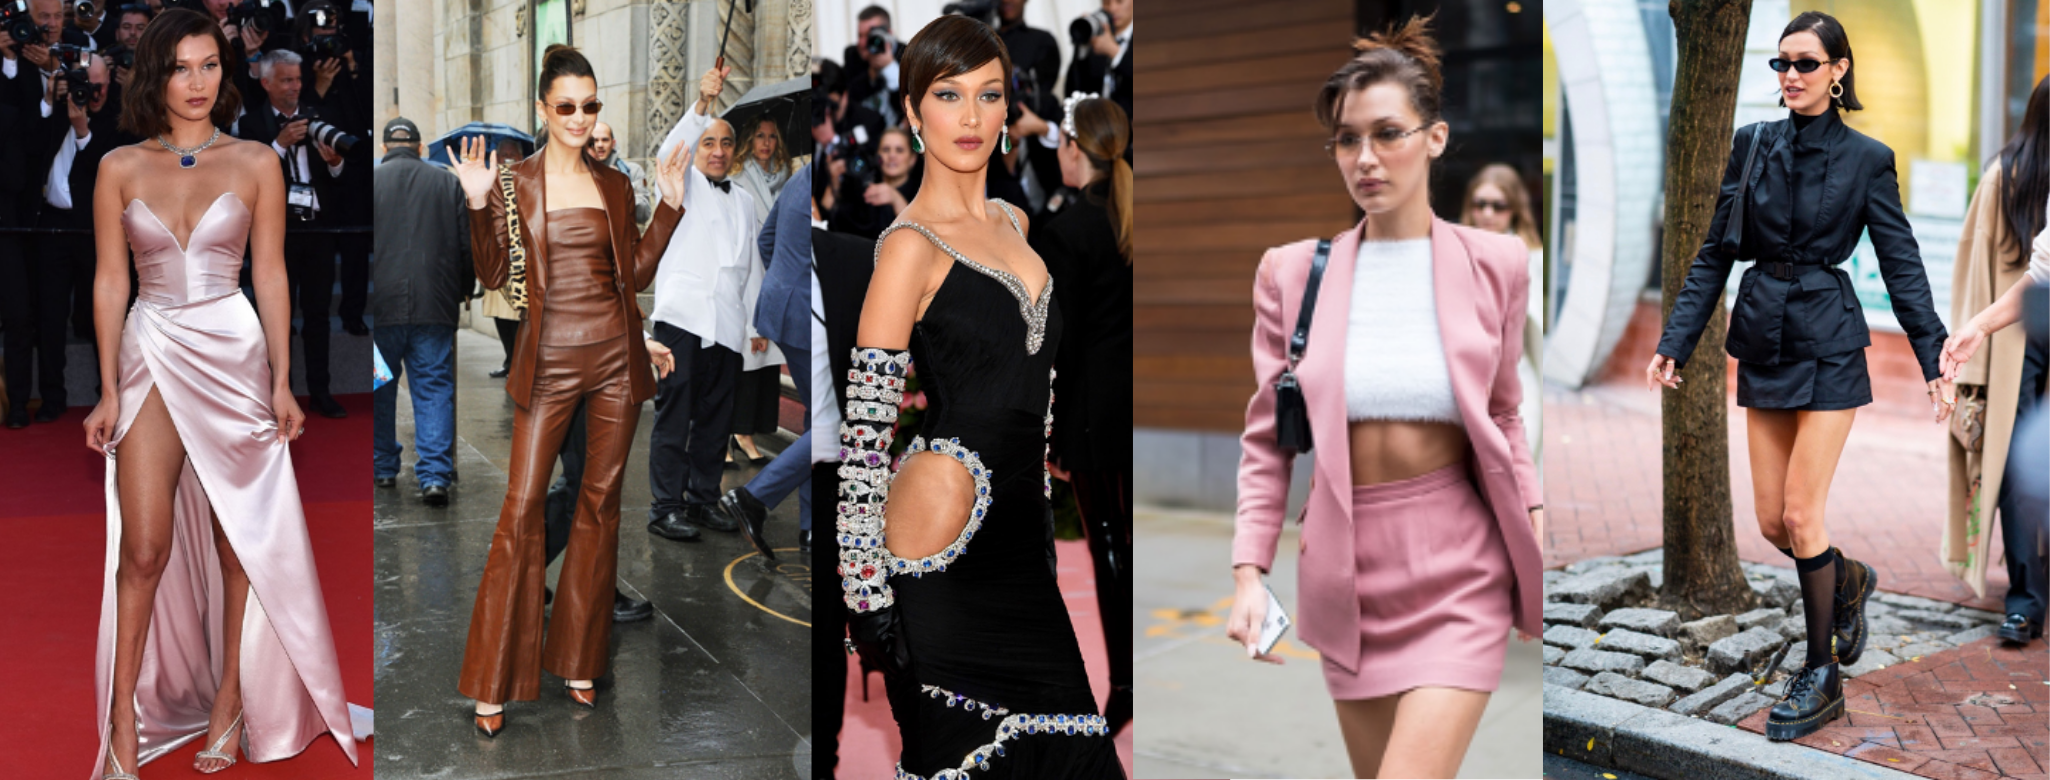 Bella Hadid Proves the Burberry Trench Can Have an Edge